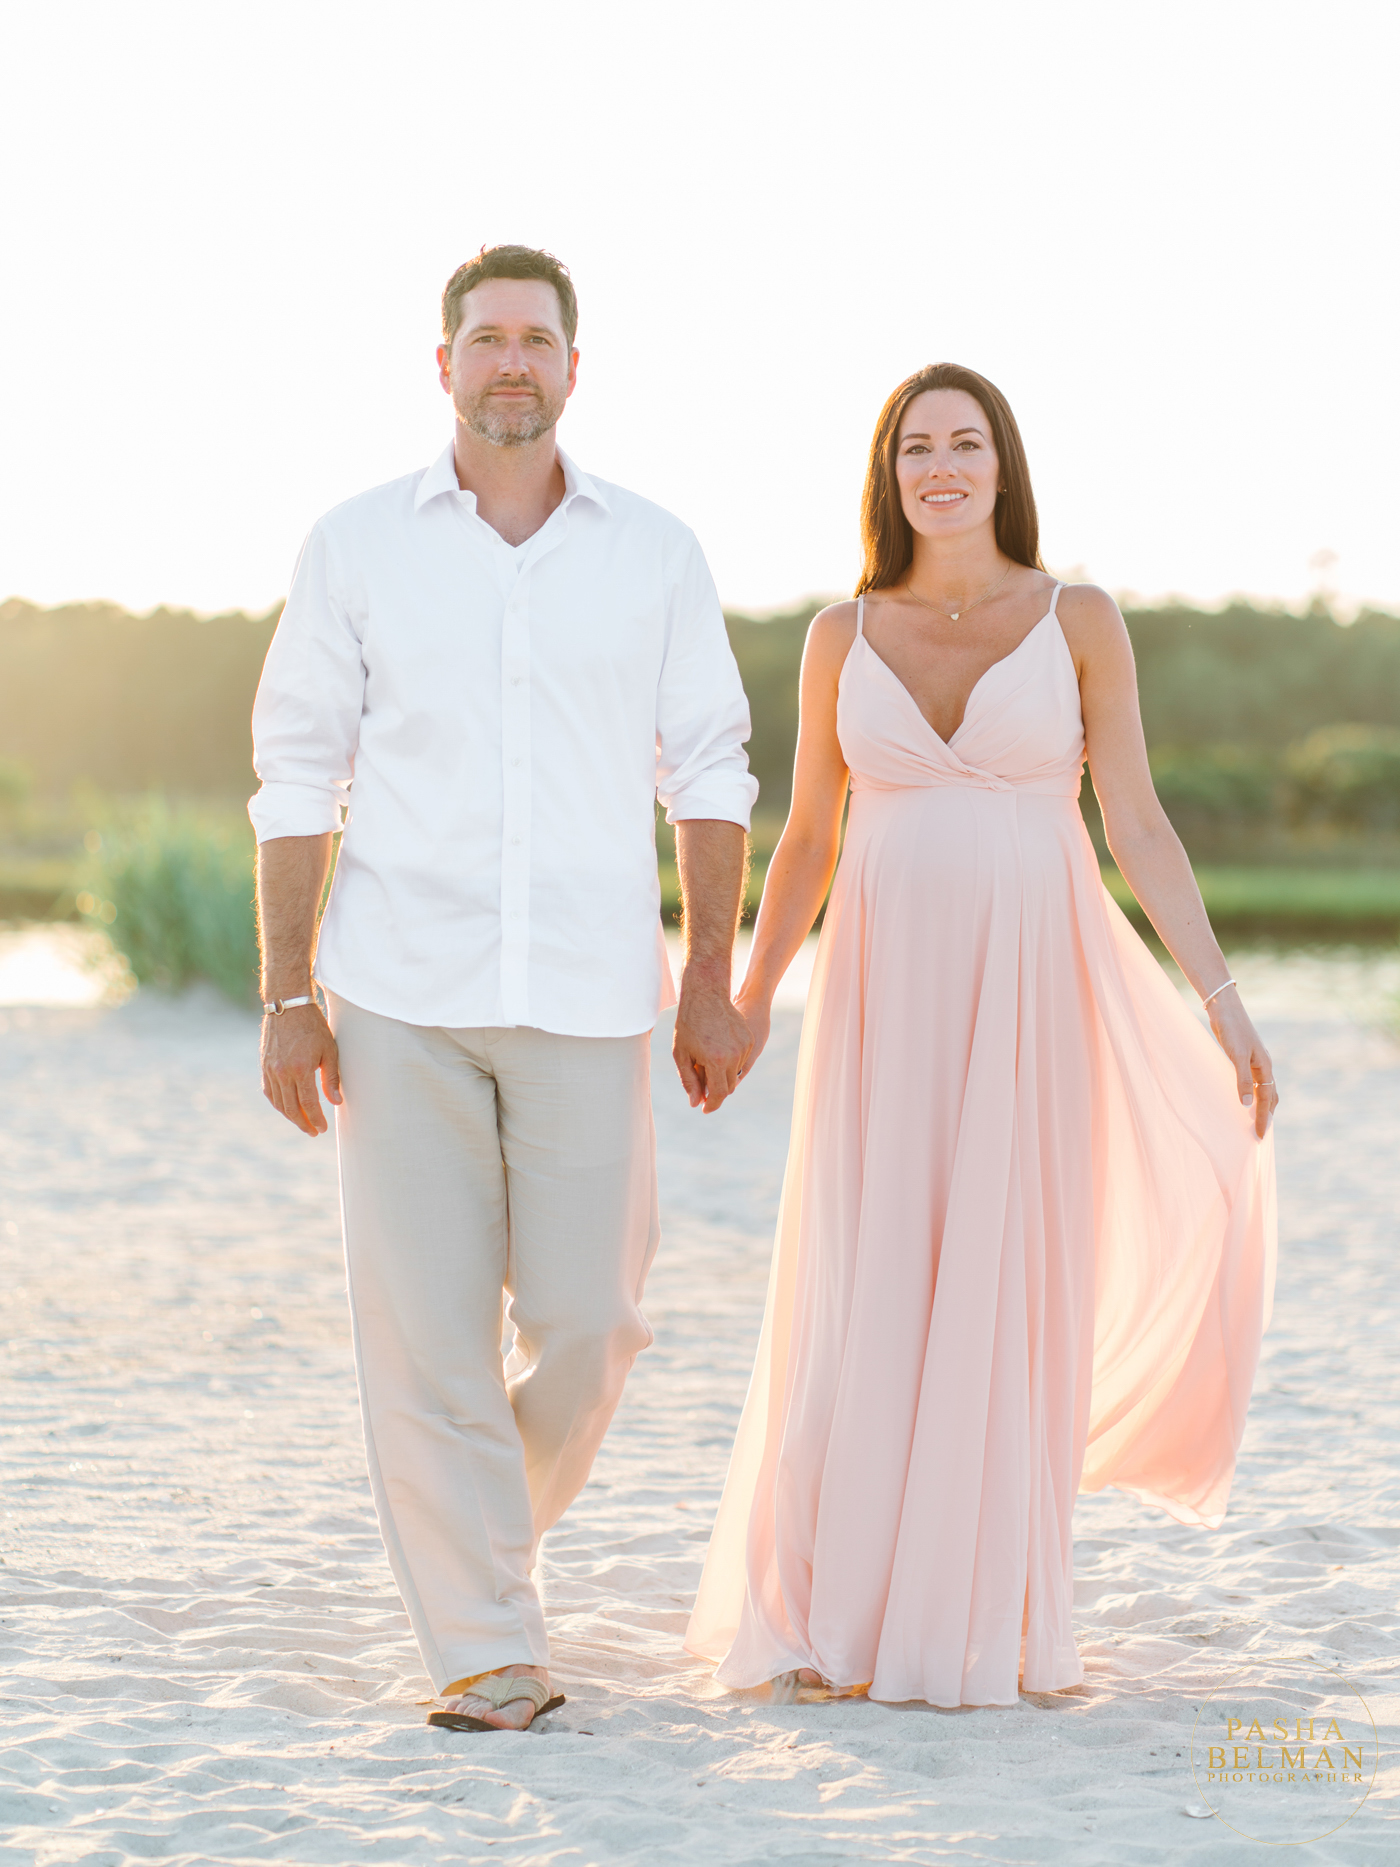 How to pose a couple during maternity session in Pawleys Island?